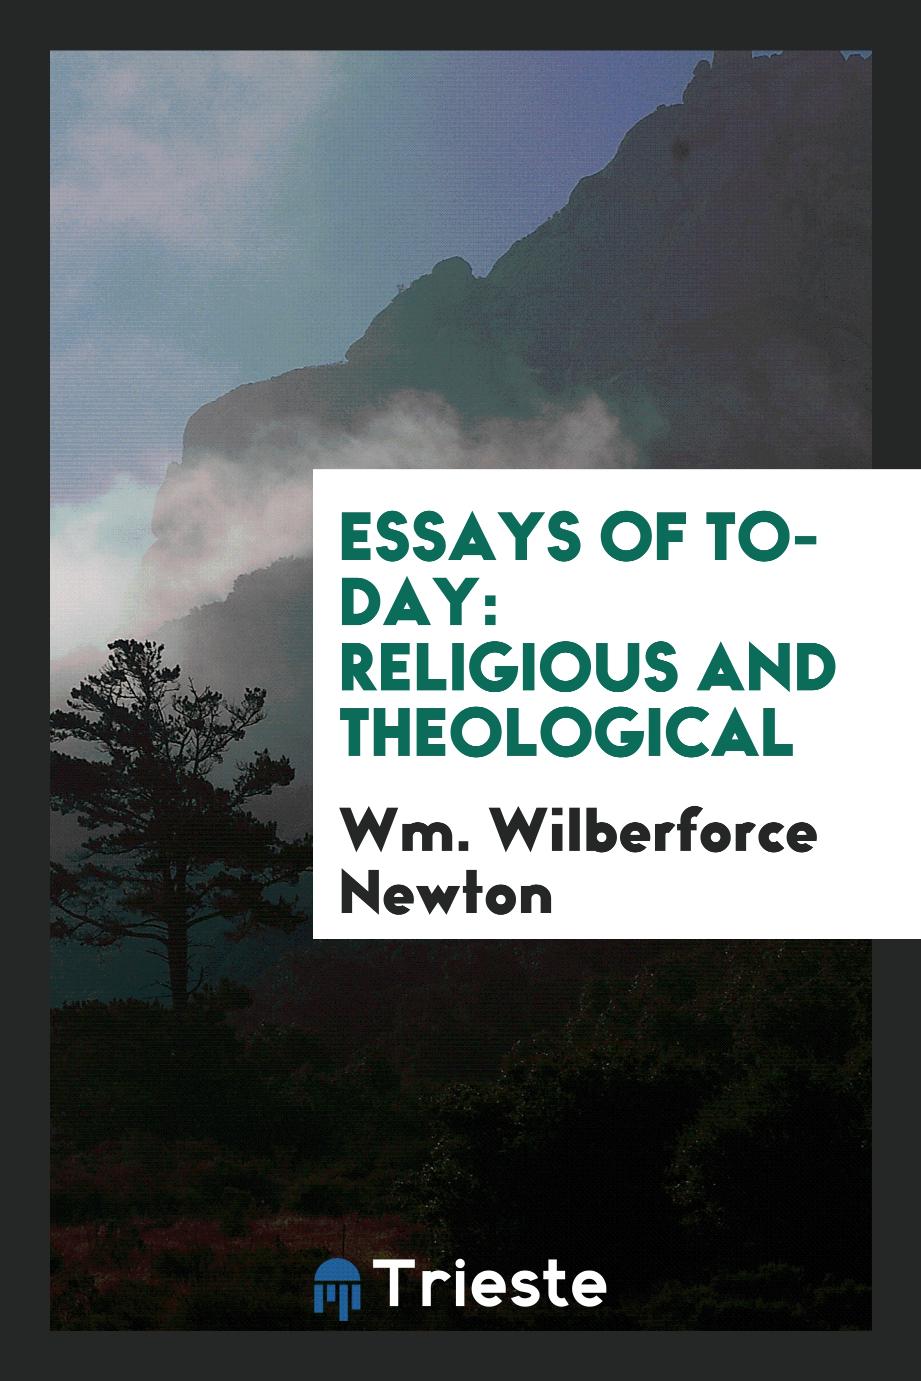 Essays of To-day: Religious and Theological